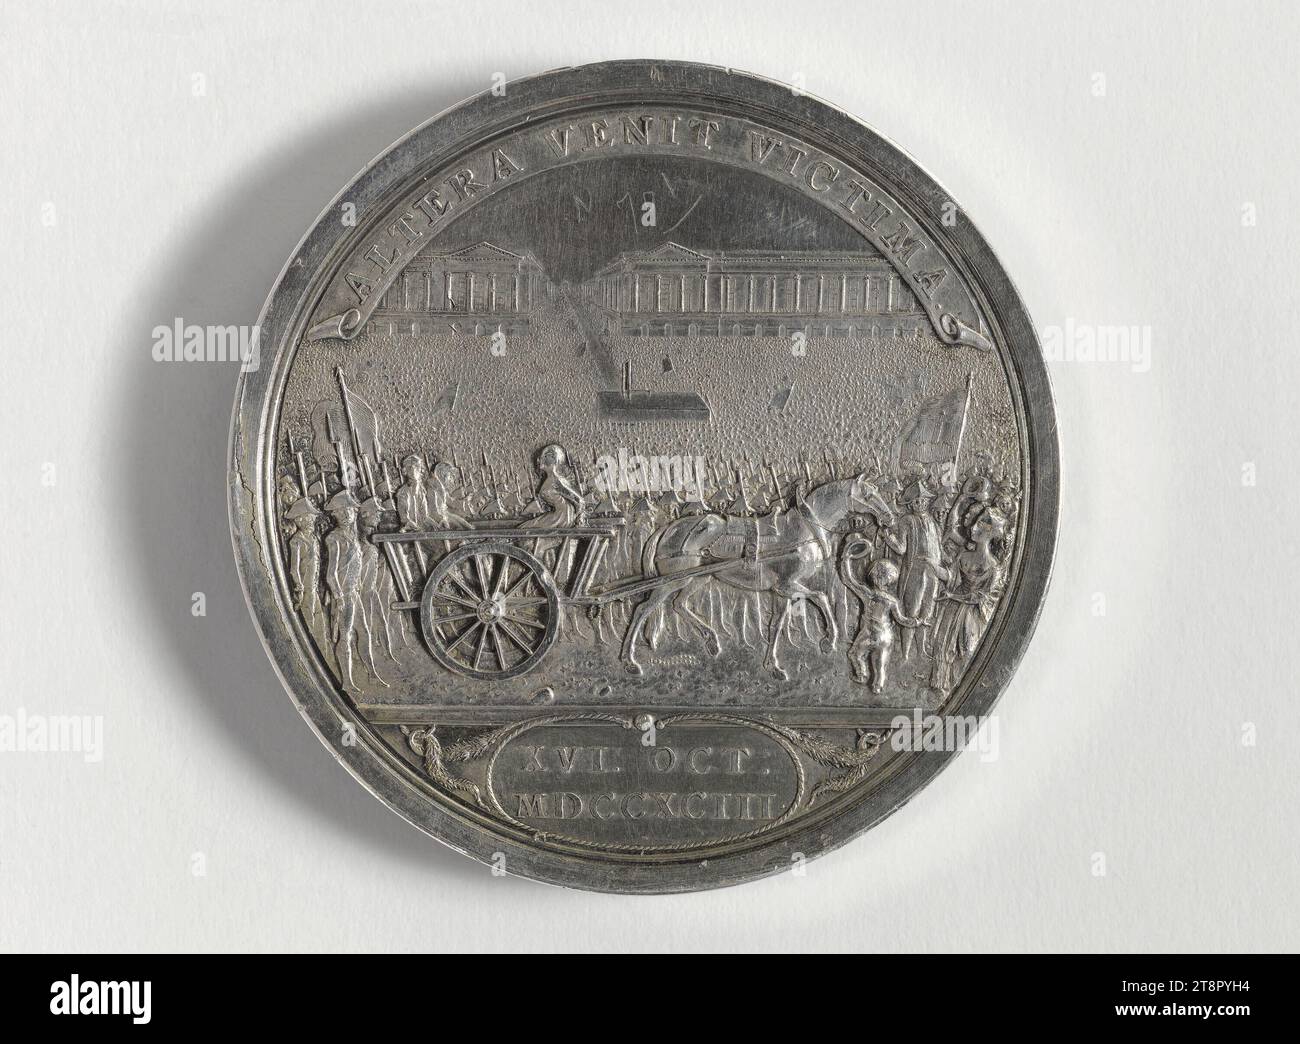 Execution of Marie-Antoinette, October 16, 1793, Küchler, Conrad Heinrich, Medal Engraver, Array, Numismatics, Medal, Dimensions - Work: Diameter: 4.8 cm, Weight (type size): 58.48 g Stock Photo